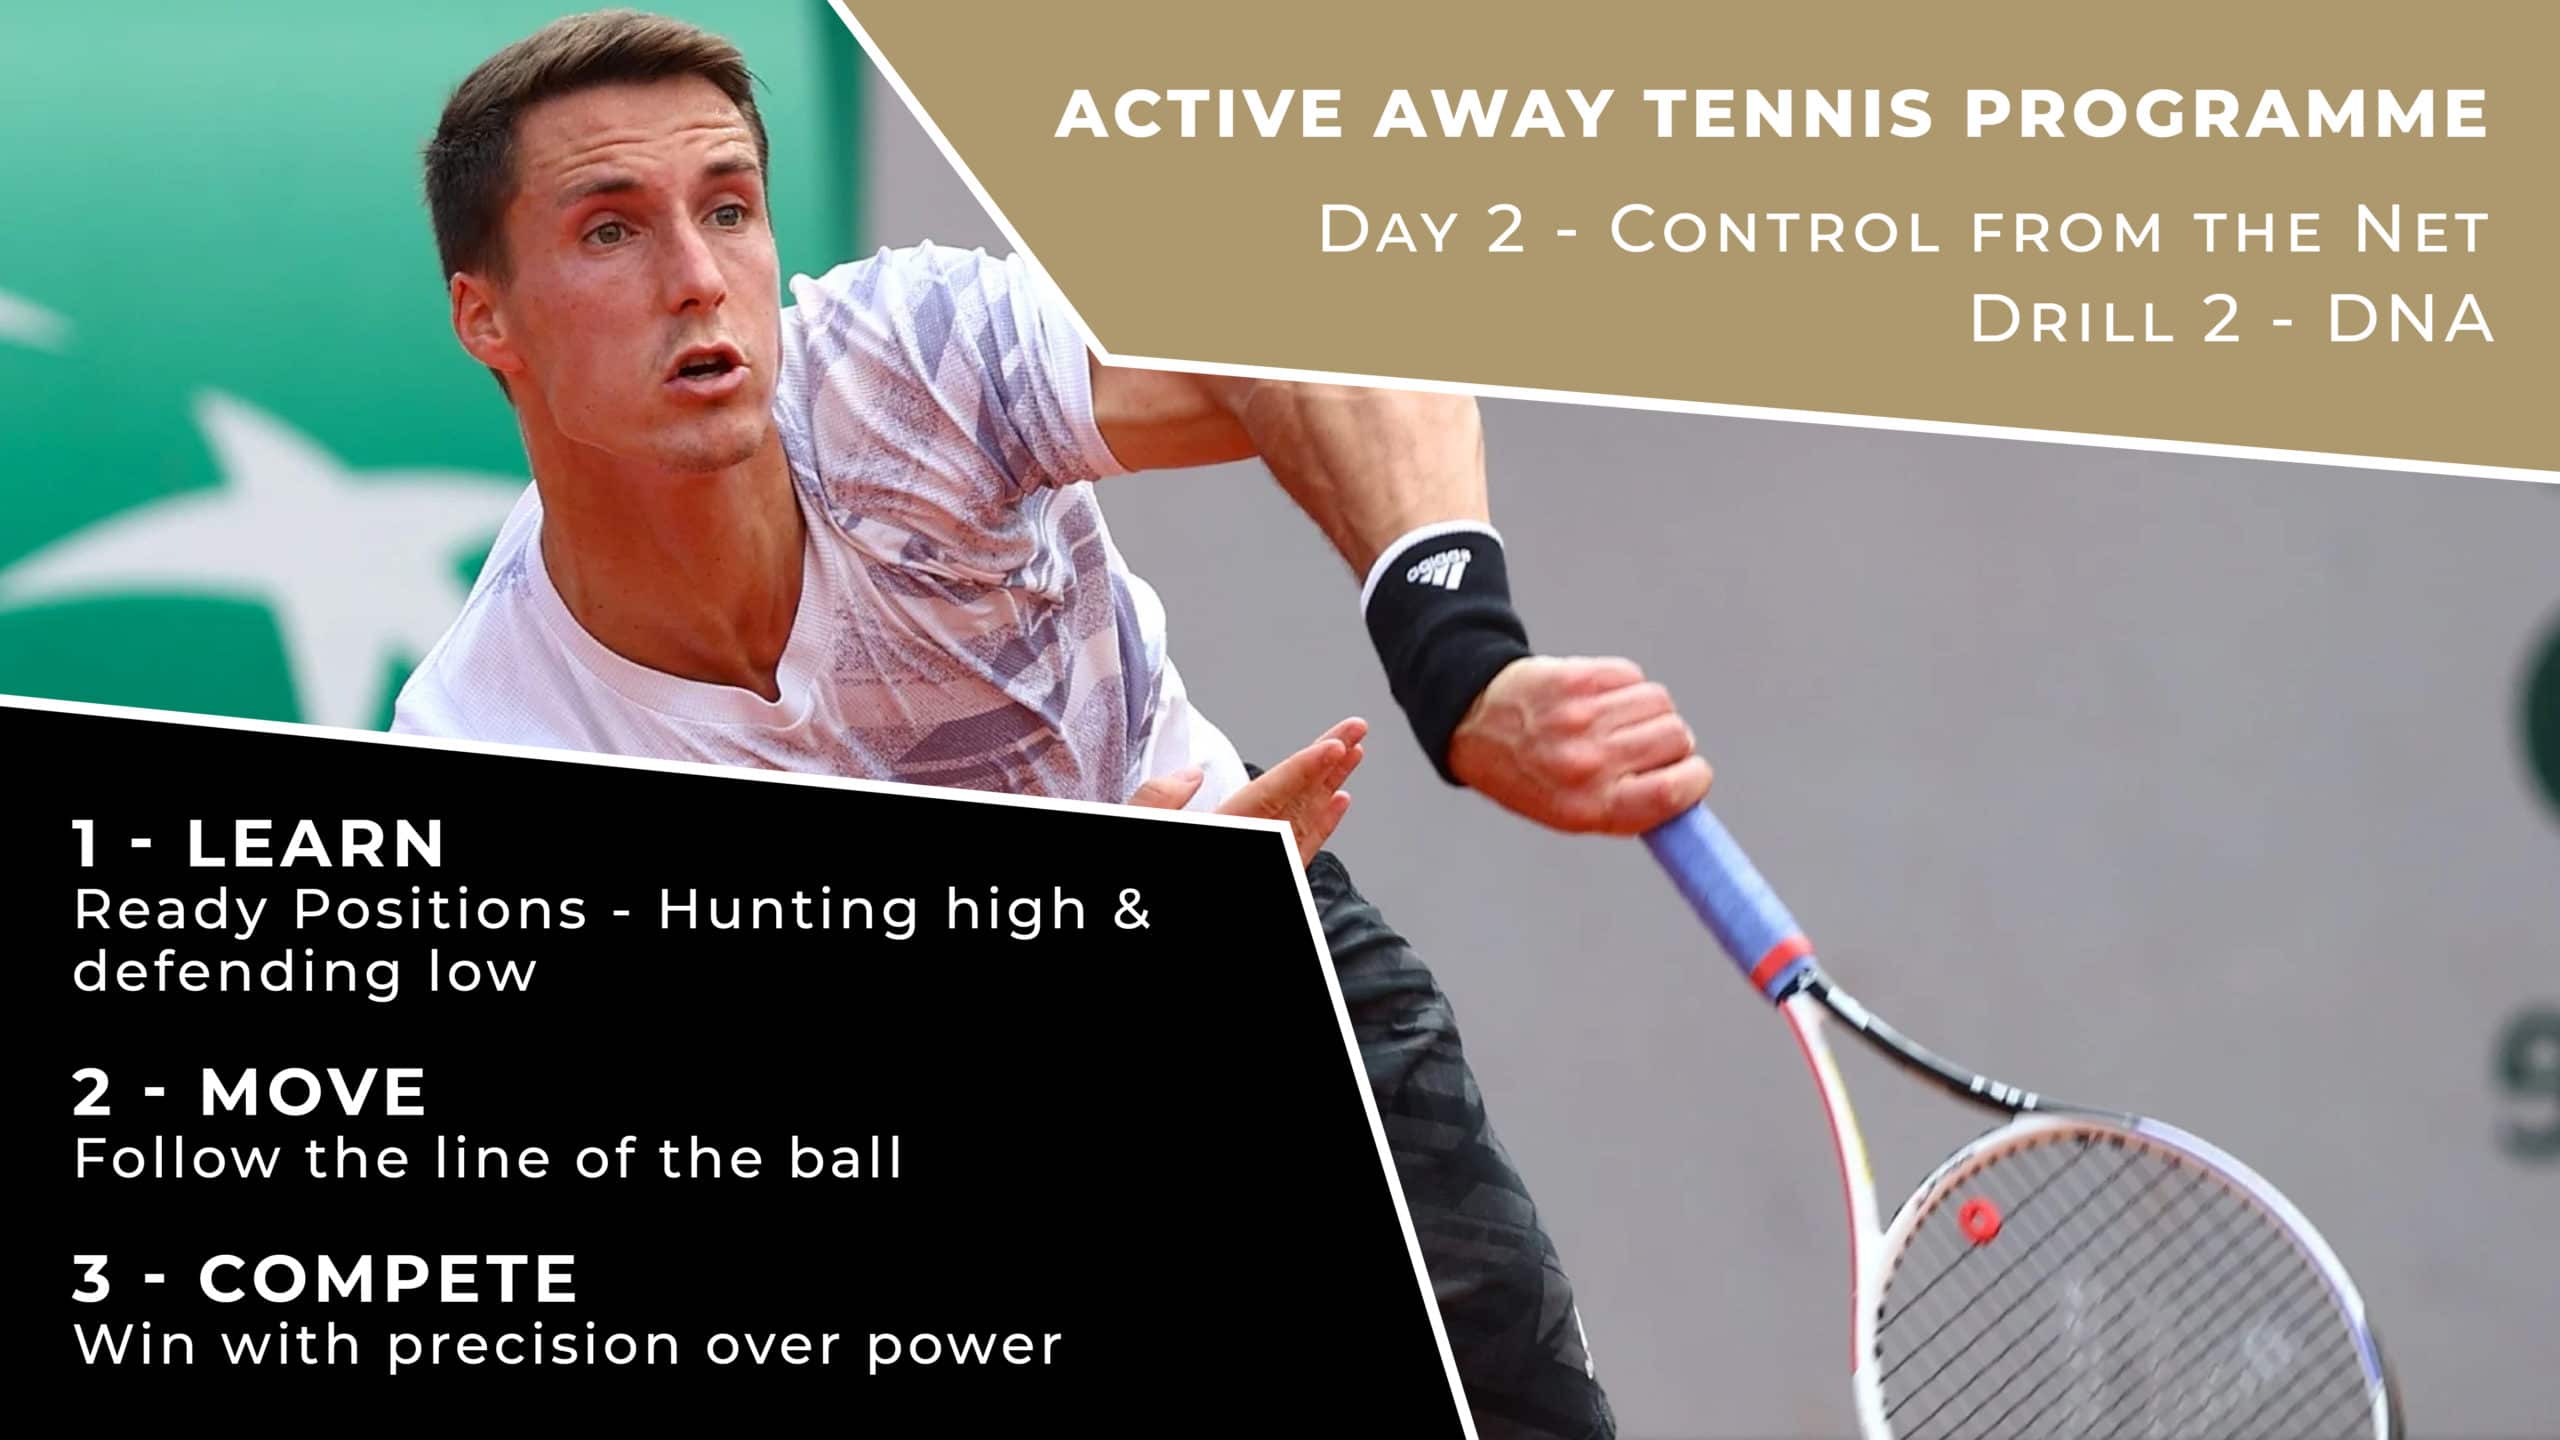 Day 2 - Control The Net Drill 2 - DNA | Active Away Tennis Programme